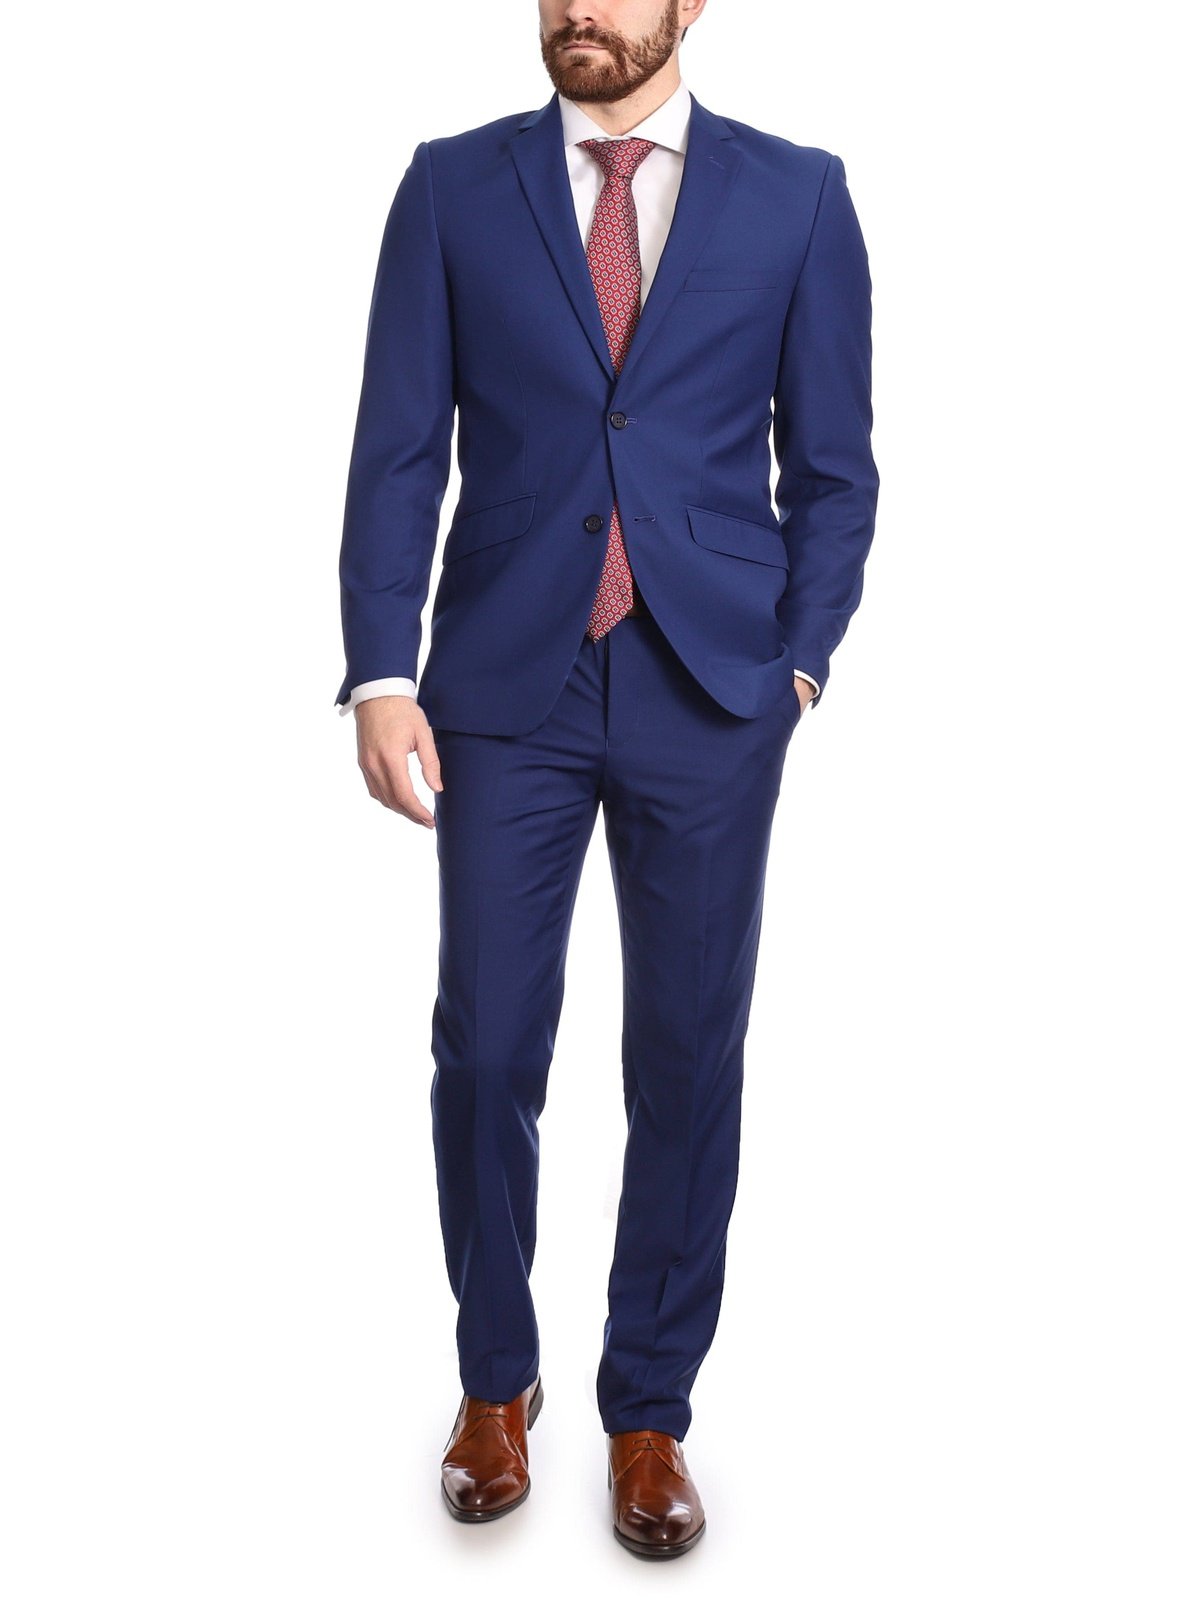 French blue two piece men's suit